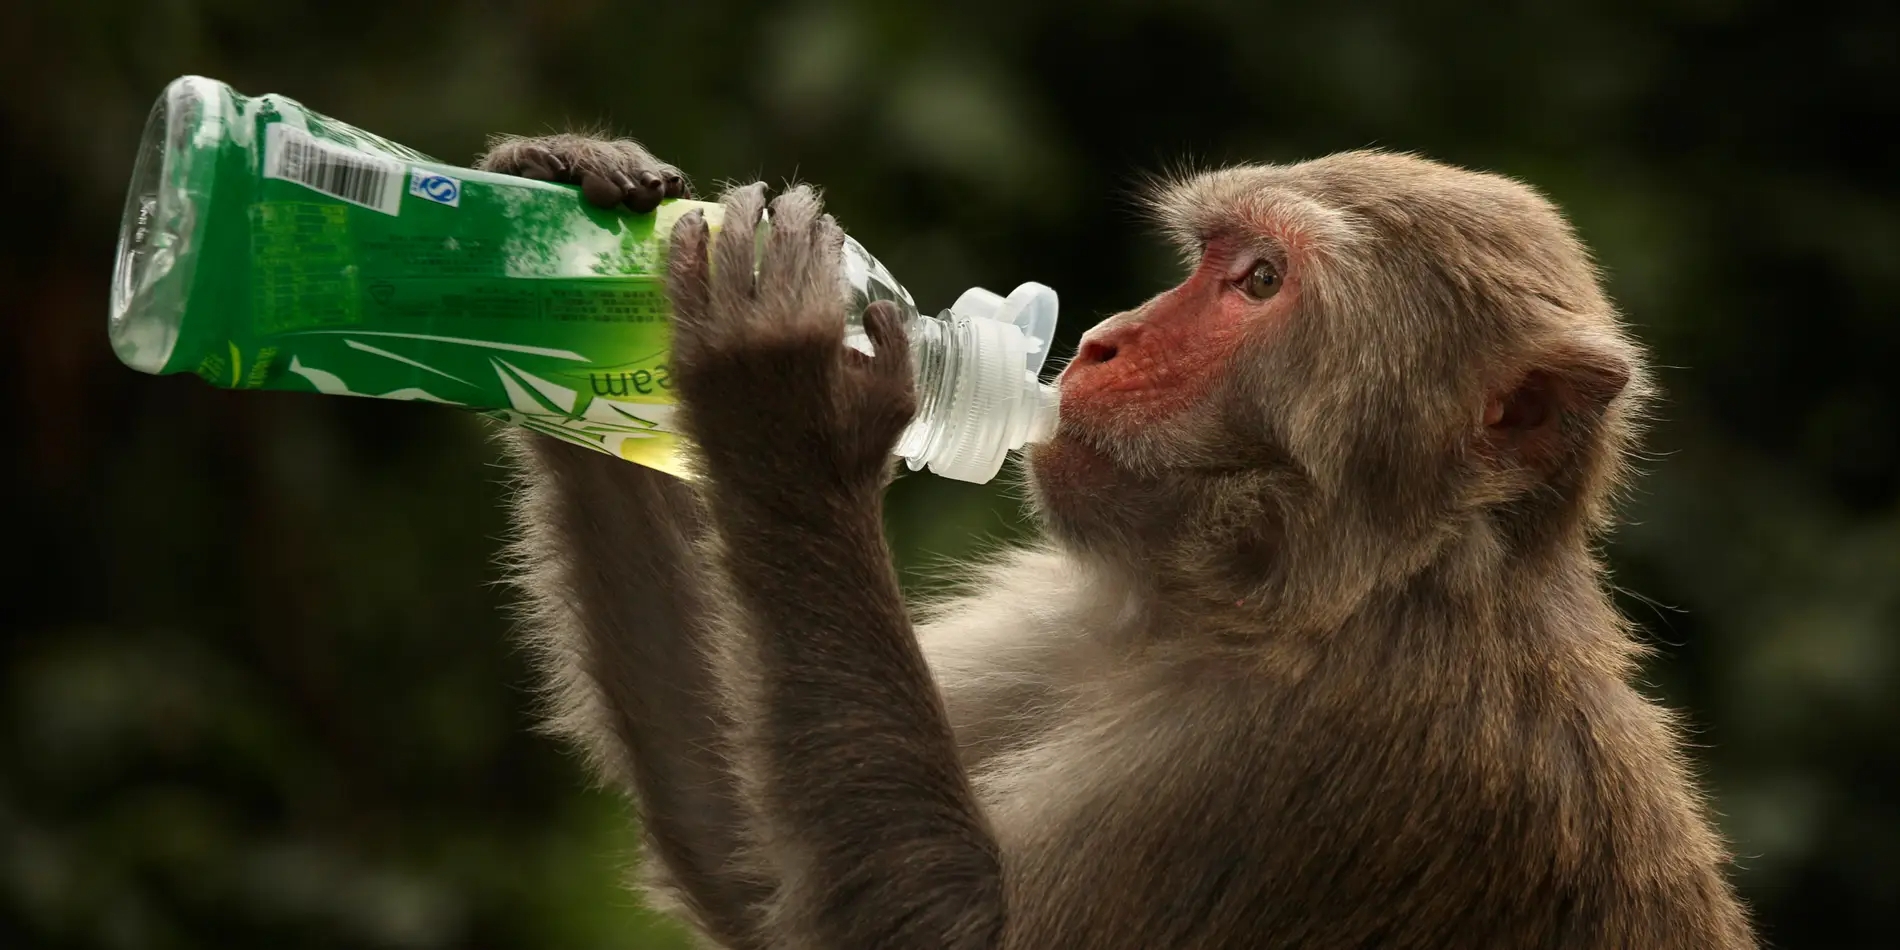 oxford developed vaccine appears to shield monkey from coronavirus infection